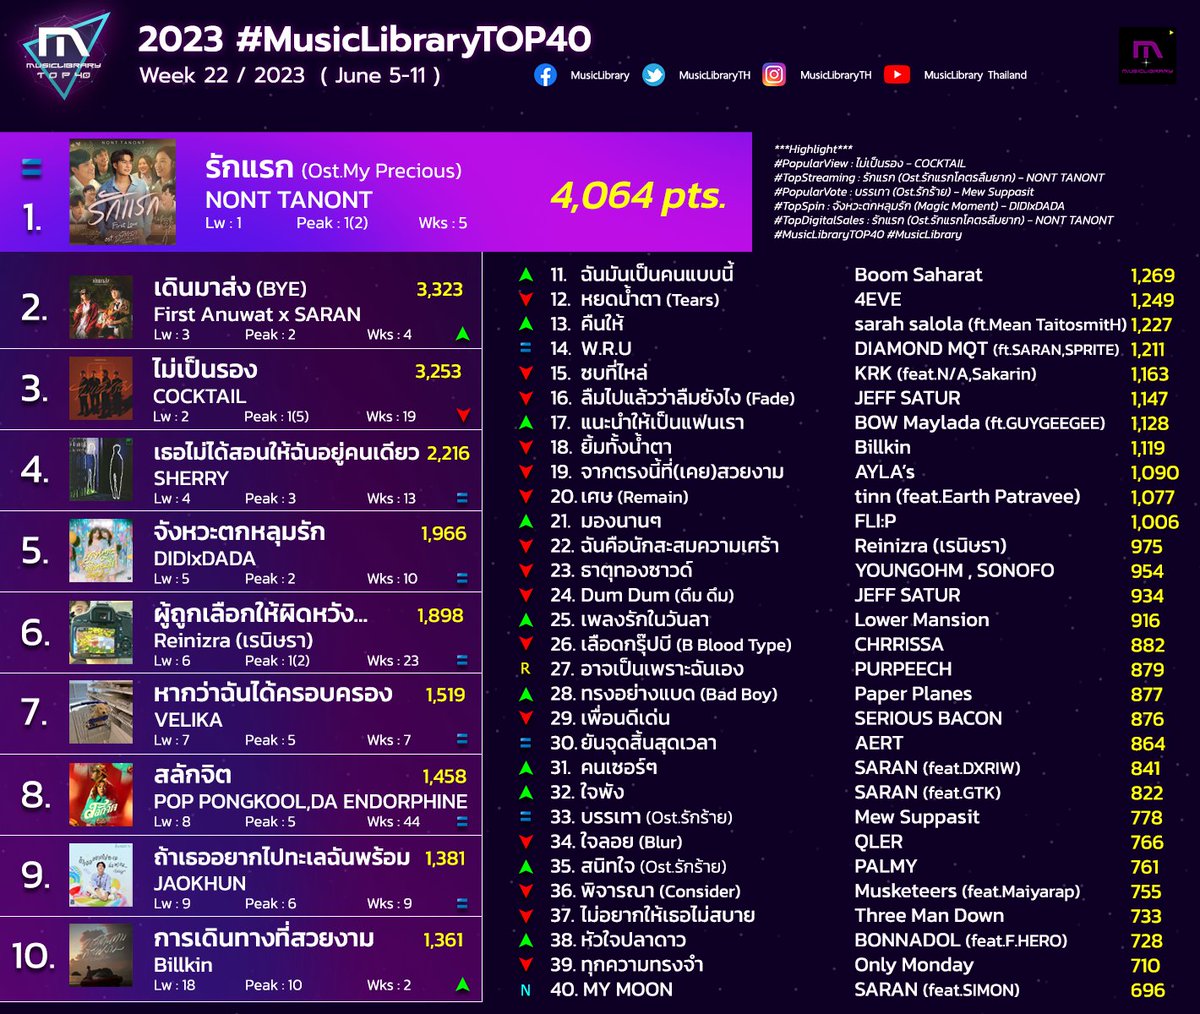 2023 #MusicLibraryTOP40 W.22

*Highlight*

CHAMP OF THE WEEK🏆x2
#รักแรก : #NONTTANONT

📽️Popular View #CheersCOCKTAIL
🎶Top Streaming #NONTTANONT
✅Popular Vote #MewSuppasit
📻Top Spin #DIDIxDADA
📲Digital Sales #NONTTANONT

📊: facebook.com/photo/?fbid=78…